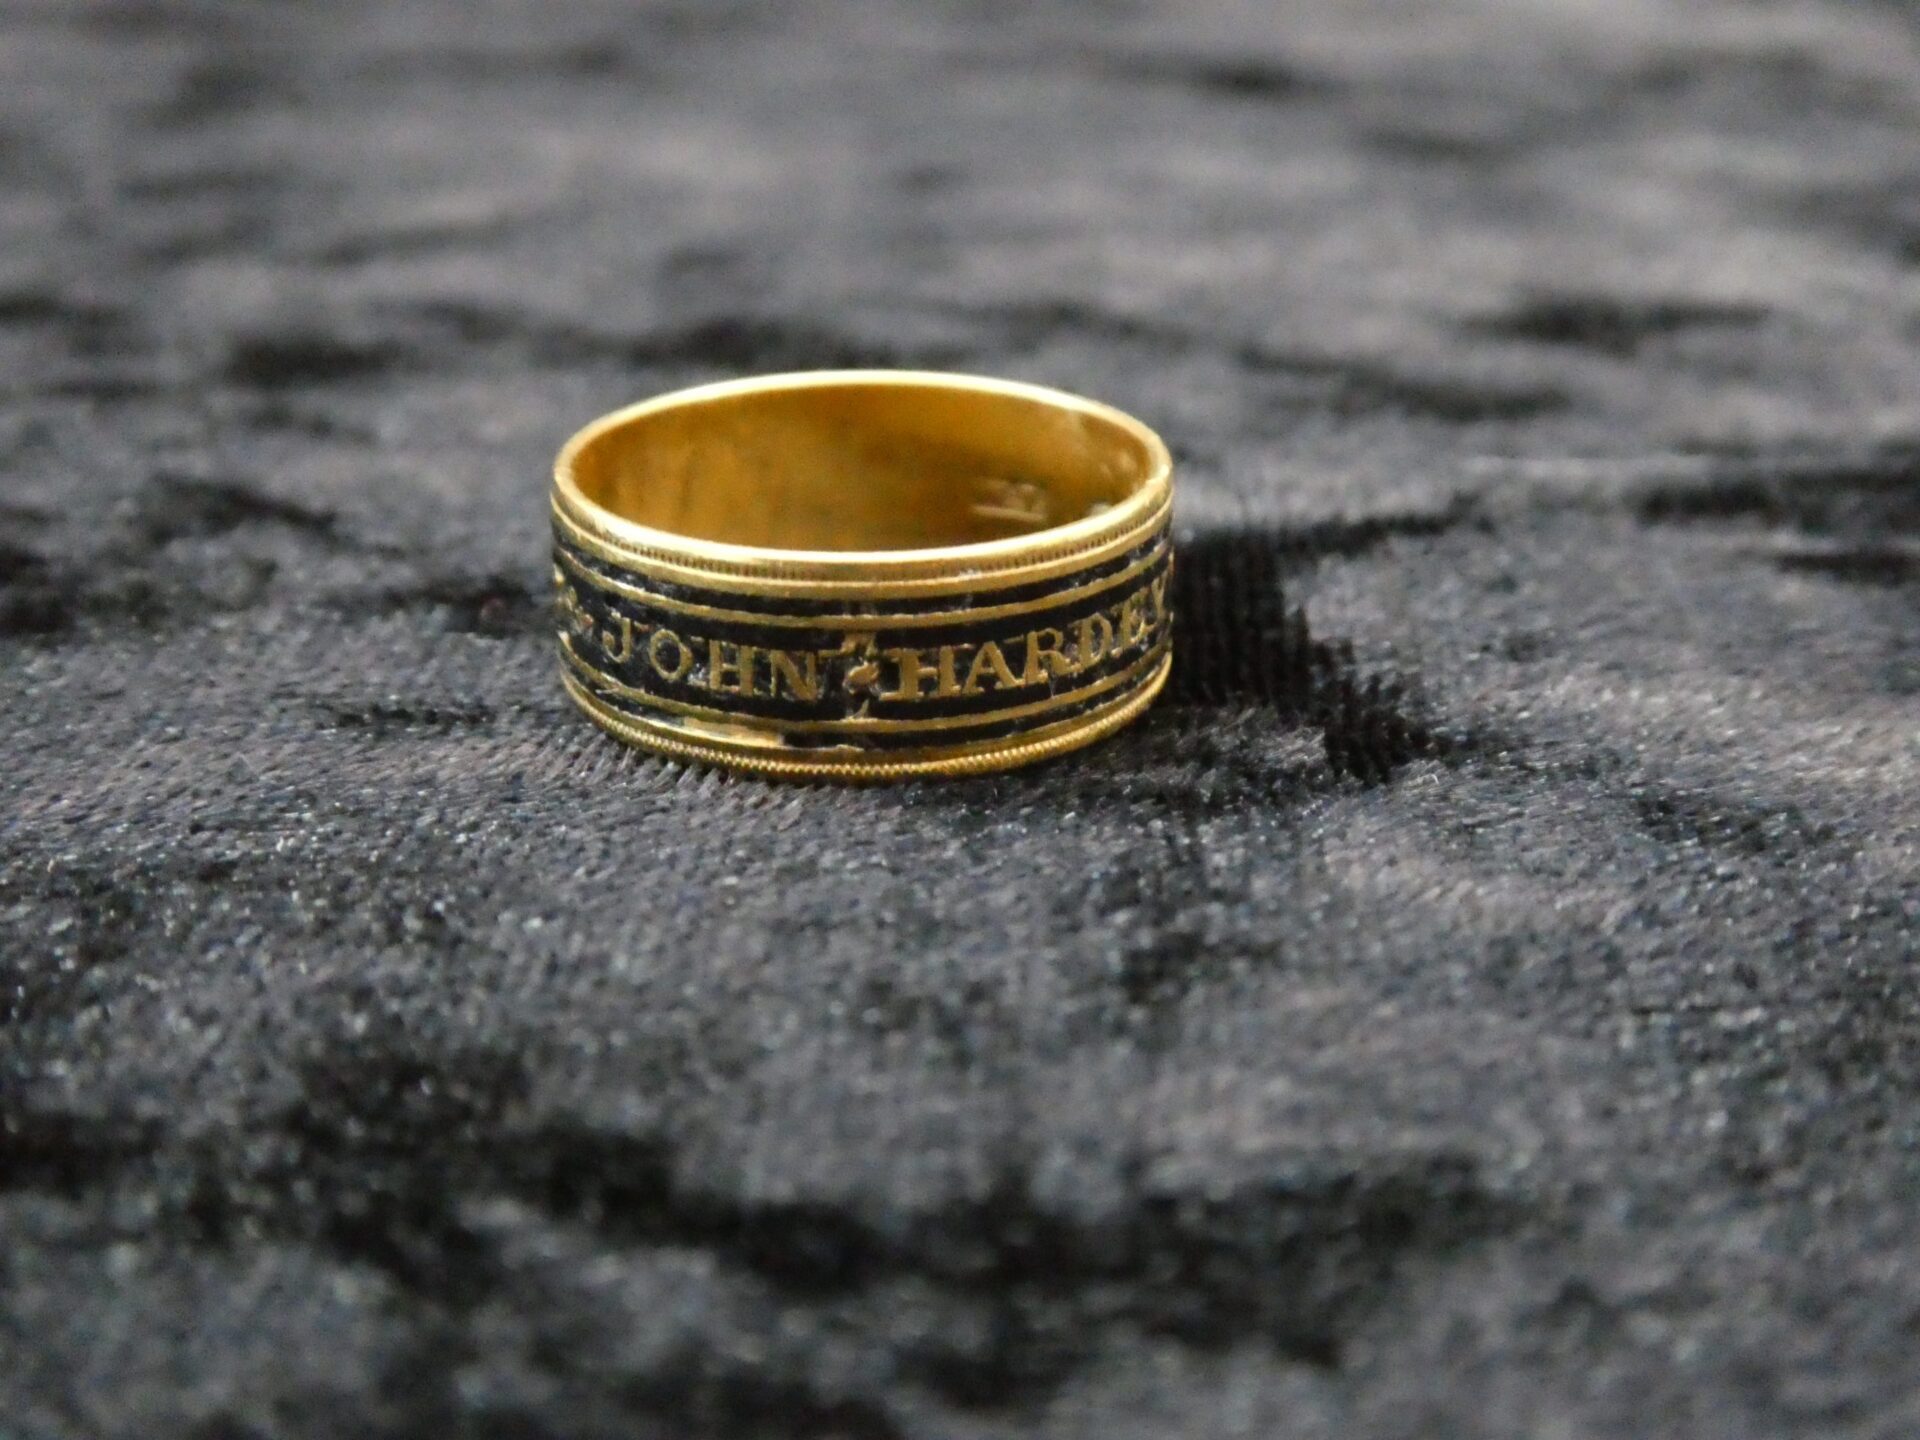 Mourning ring commemorating the death in 1814 of John Hardey, grandfather of Joseph Hardey of Peninsula Farm.